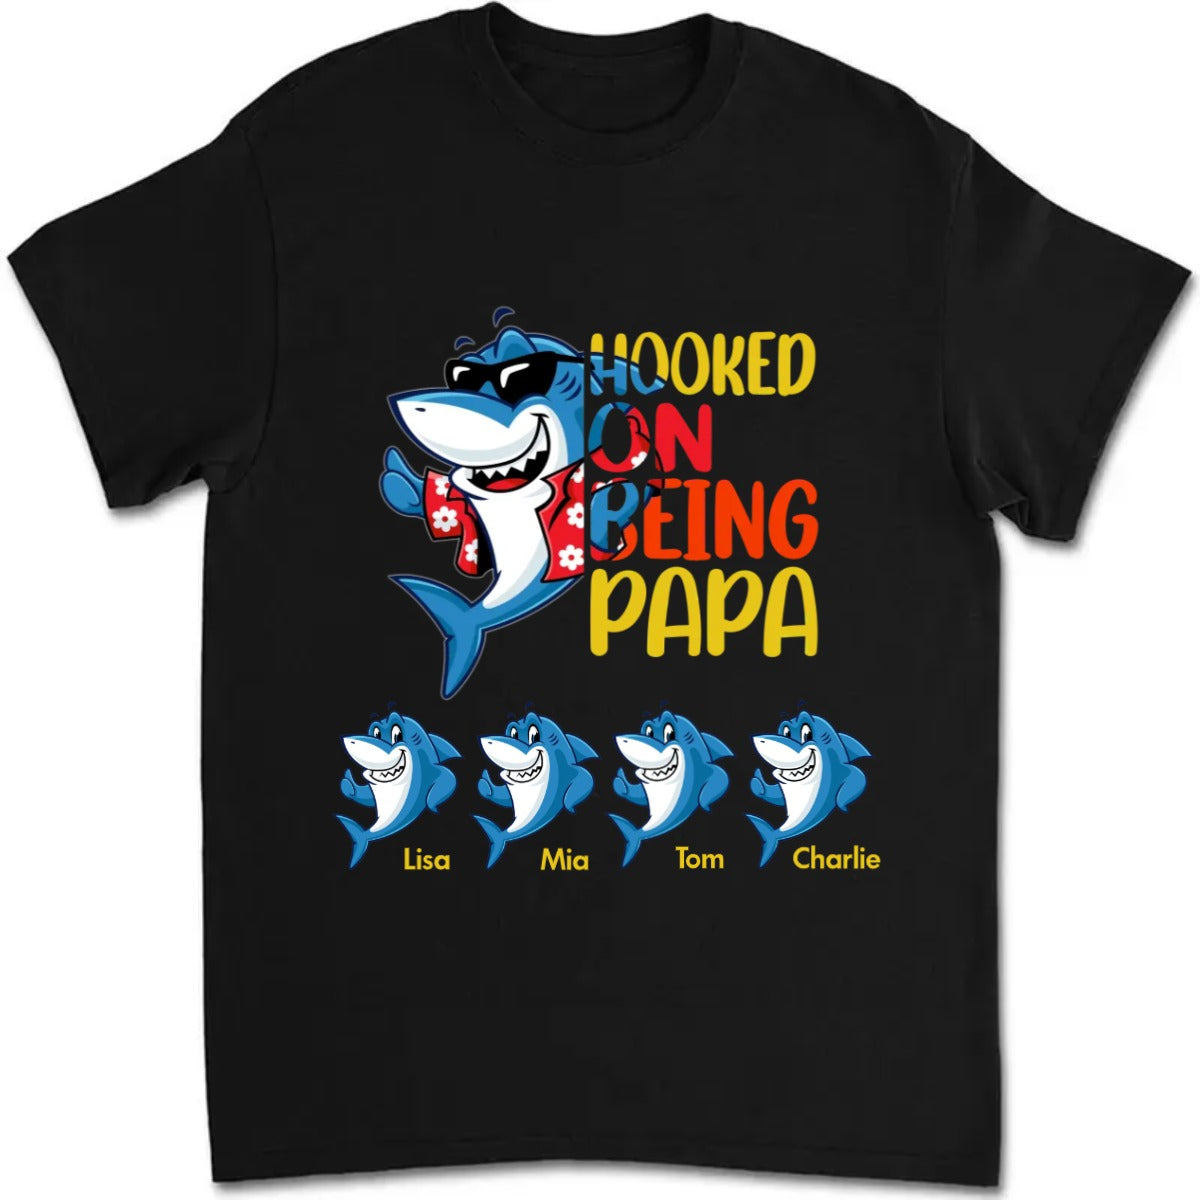 Personalized Grandpa Shark Shirt Father's Day Personalized Shirt For Birthday Gift